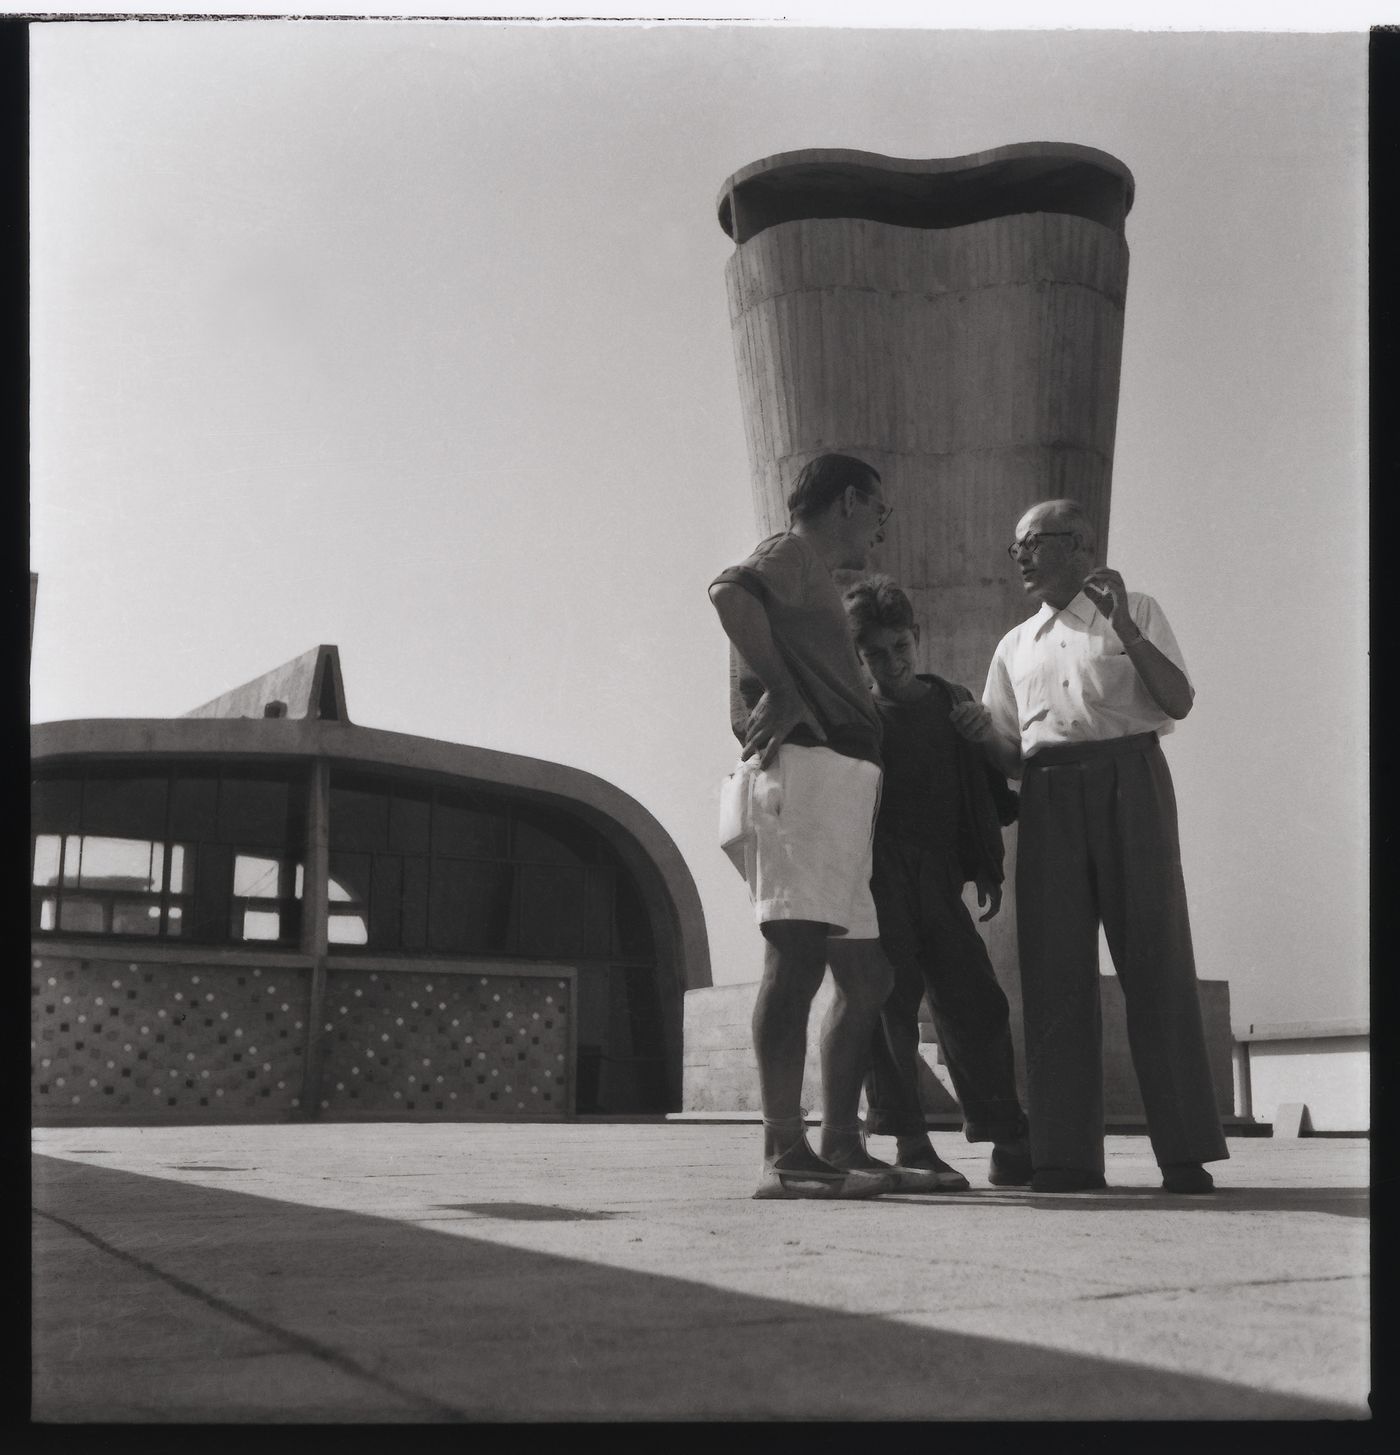 Pierre Jeanneret on the roof of the Unité d'Habitation in Marseille